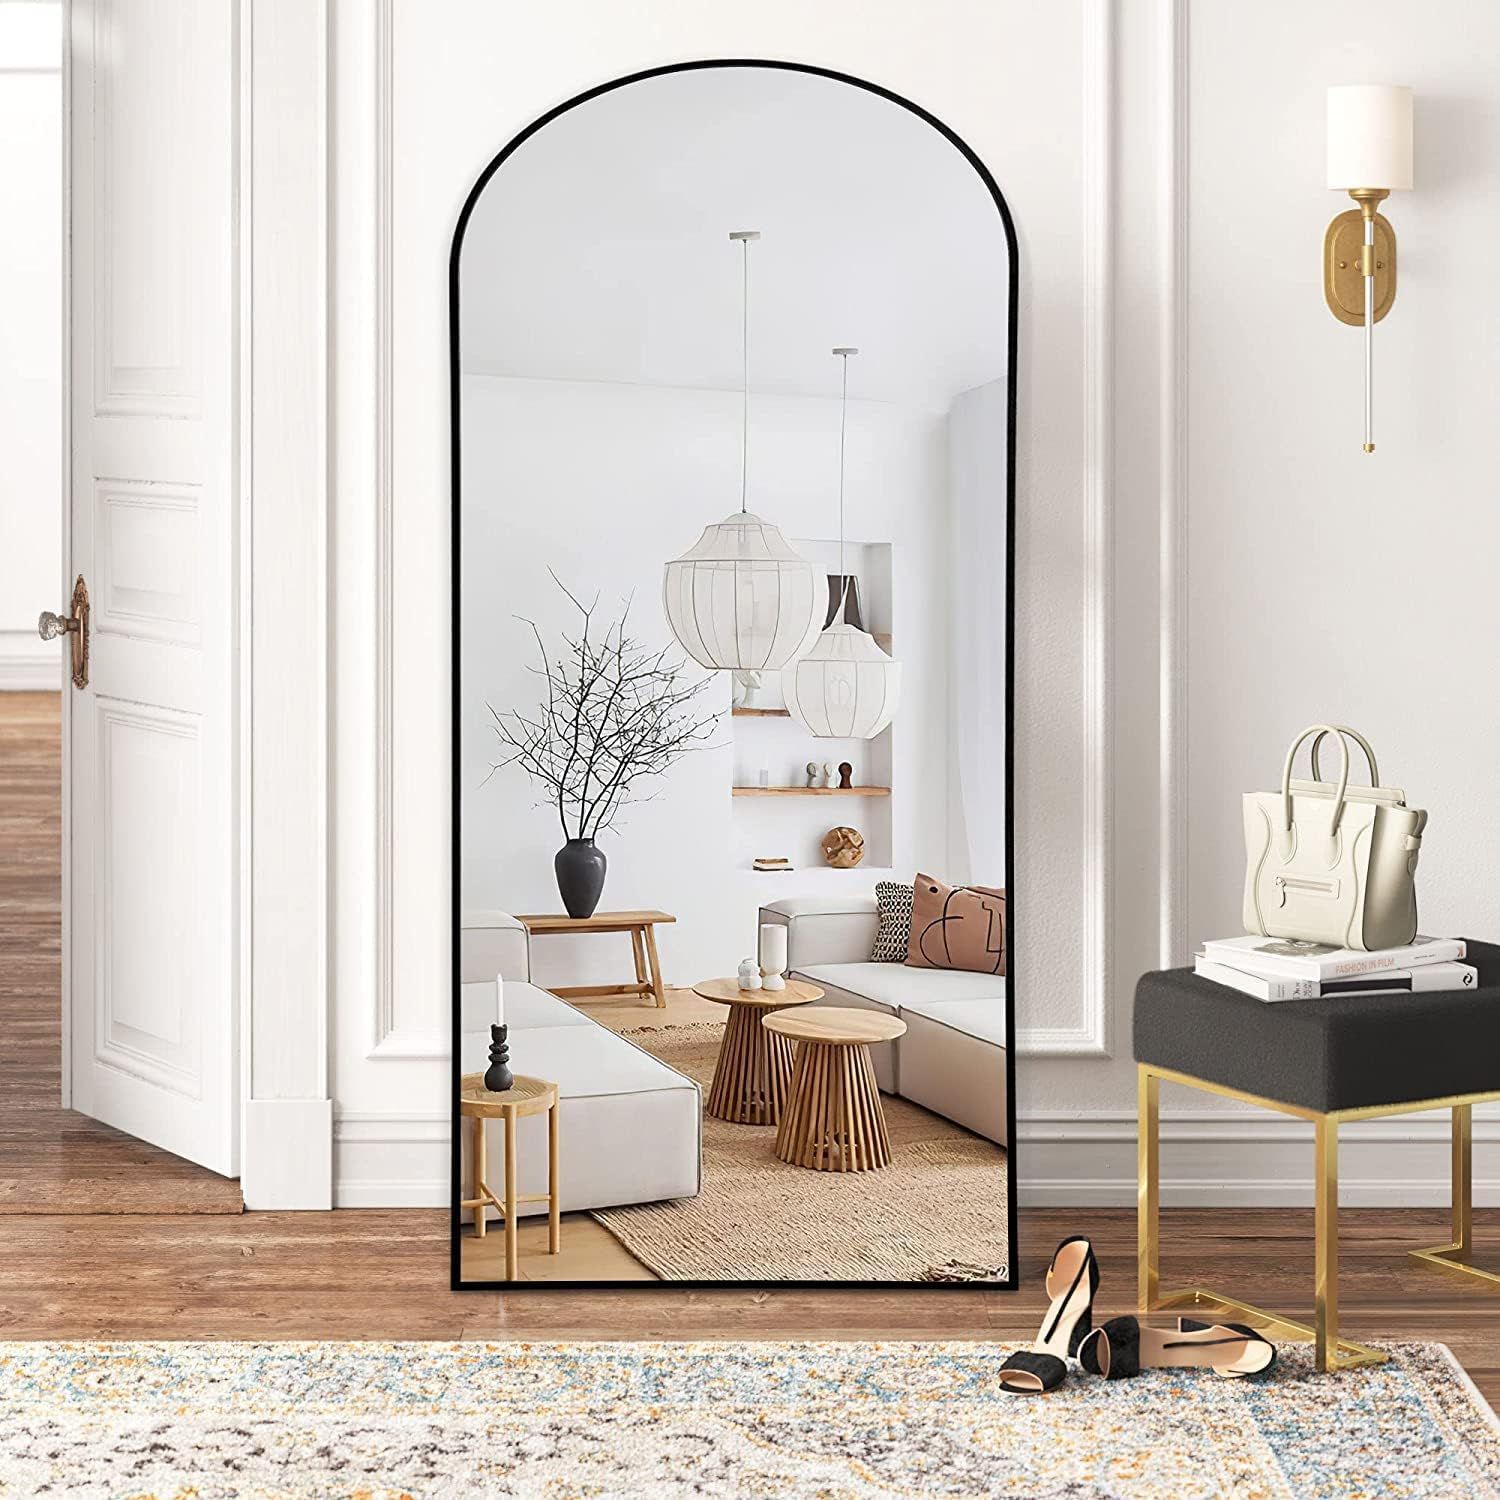 HARRITPURE 65"x22" Arched Full Length Mirror Free Standing Leaning Mirror Hanging Mounted Mirror Alu | Amazon (US)